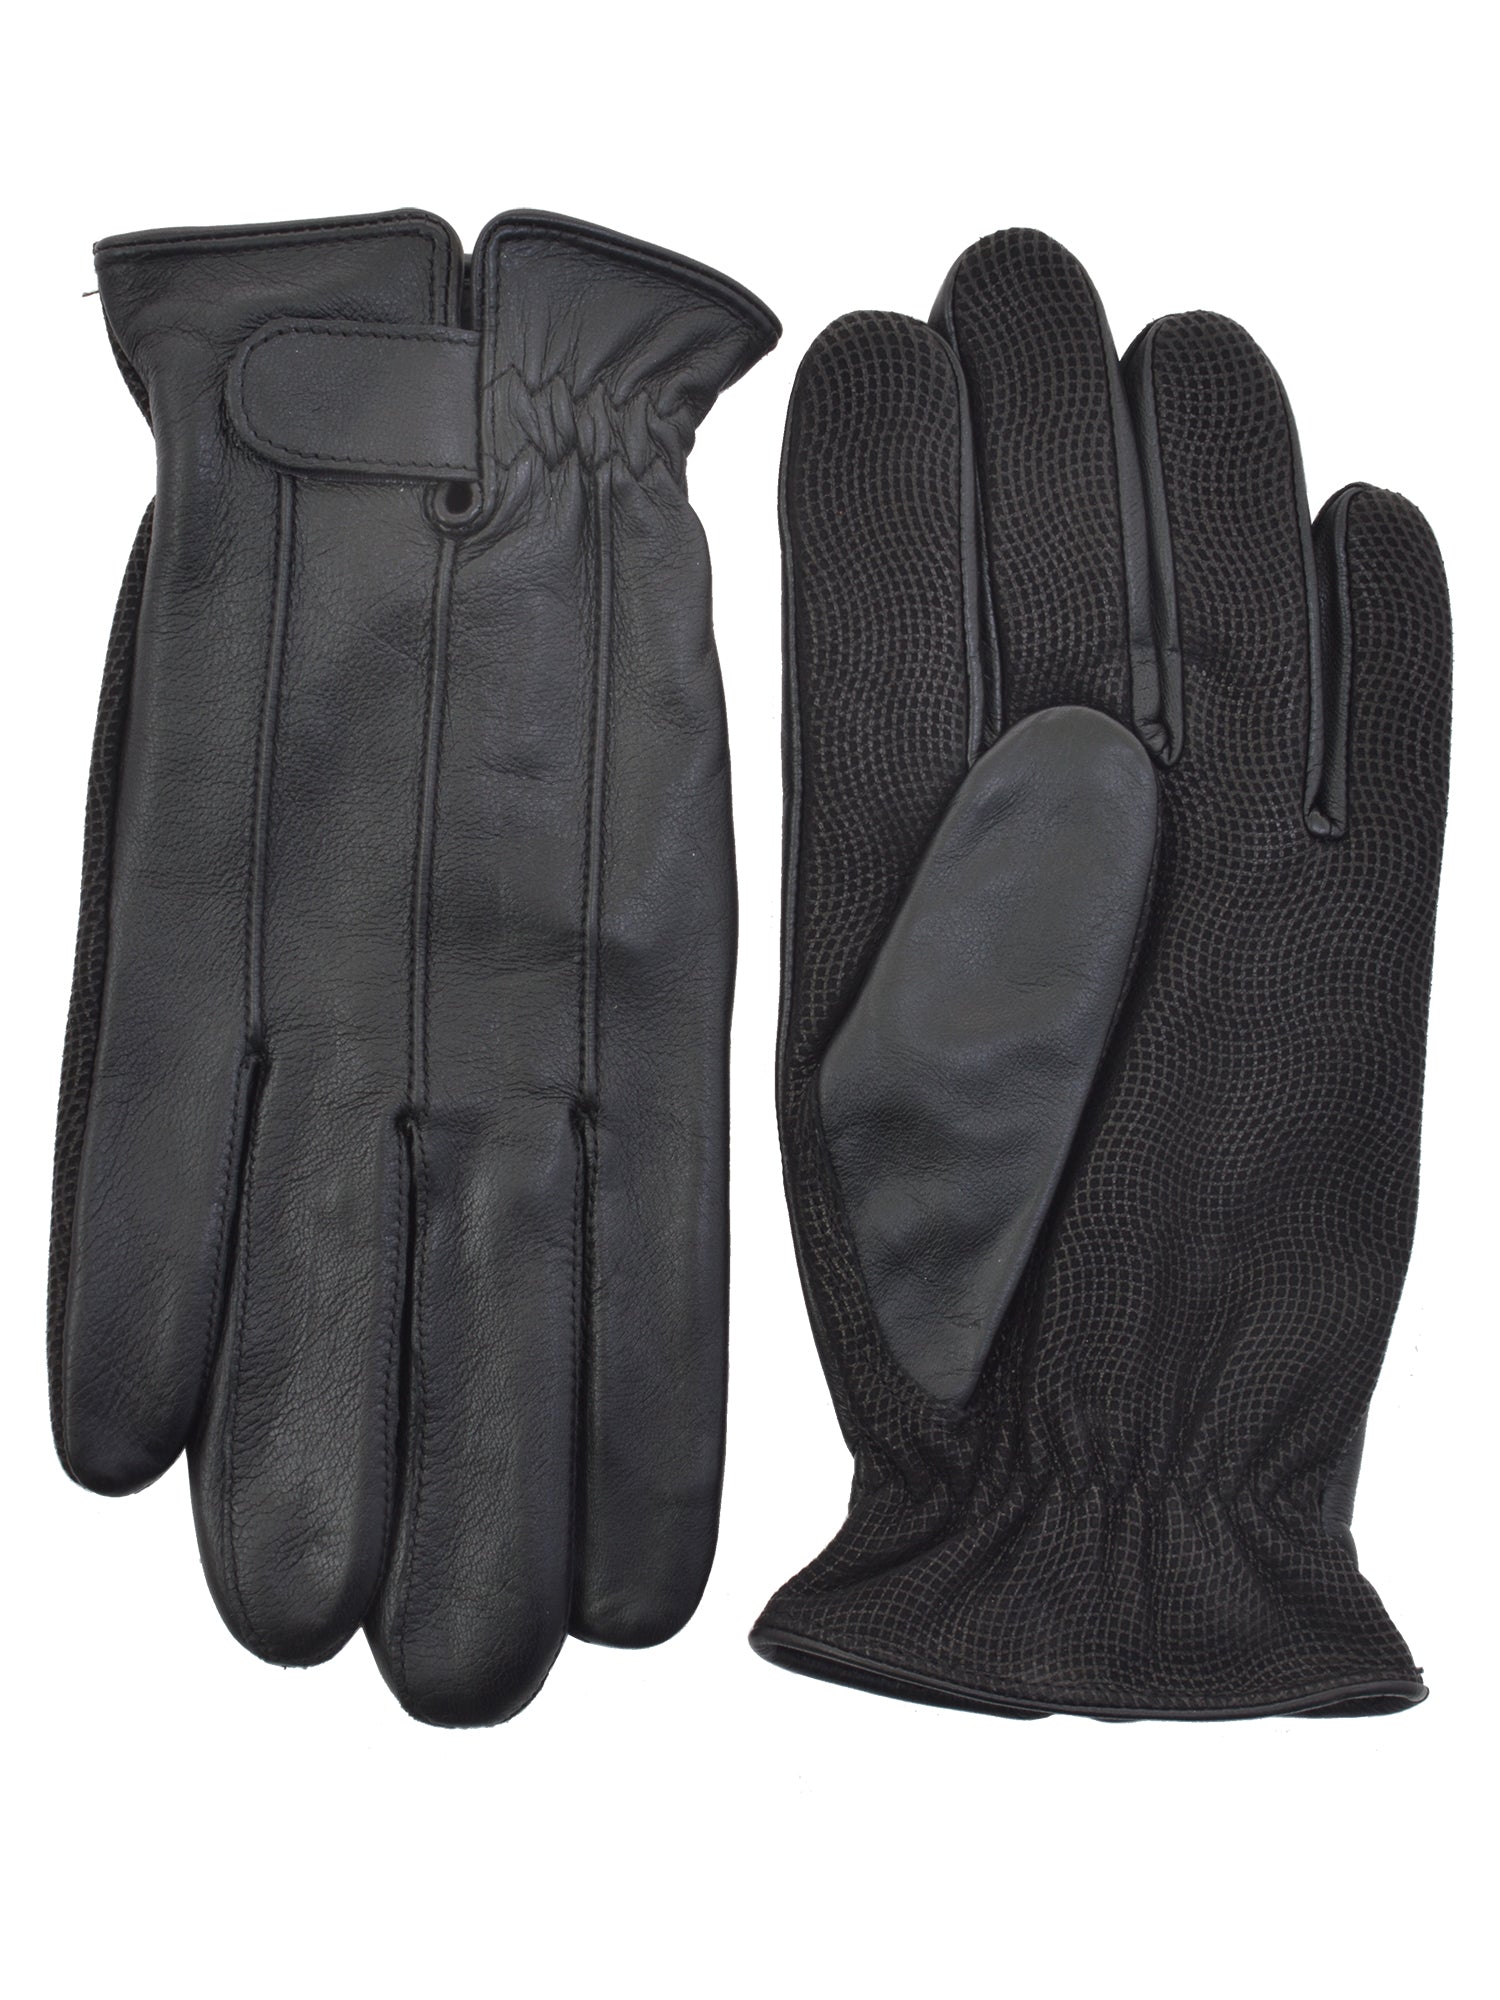 Lauer Sheepskin Leather Driving Gloves by Milwaukee in Black - 1807-BLK